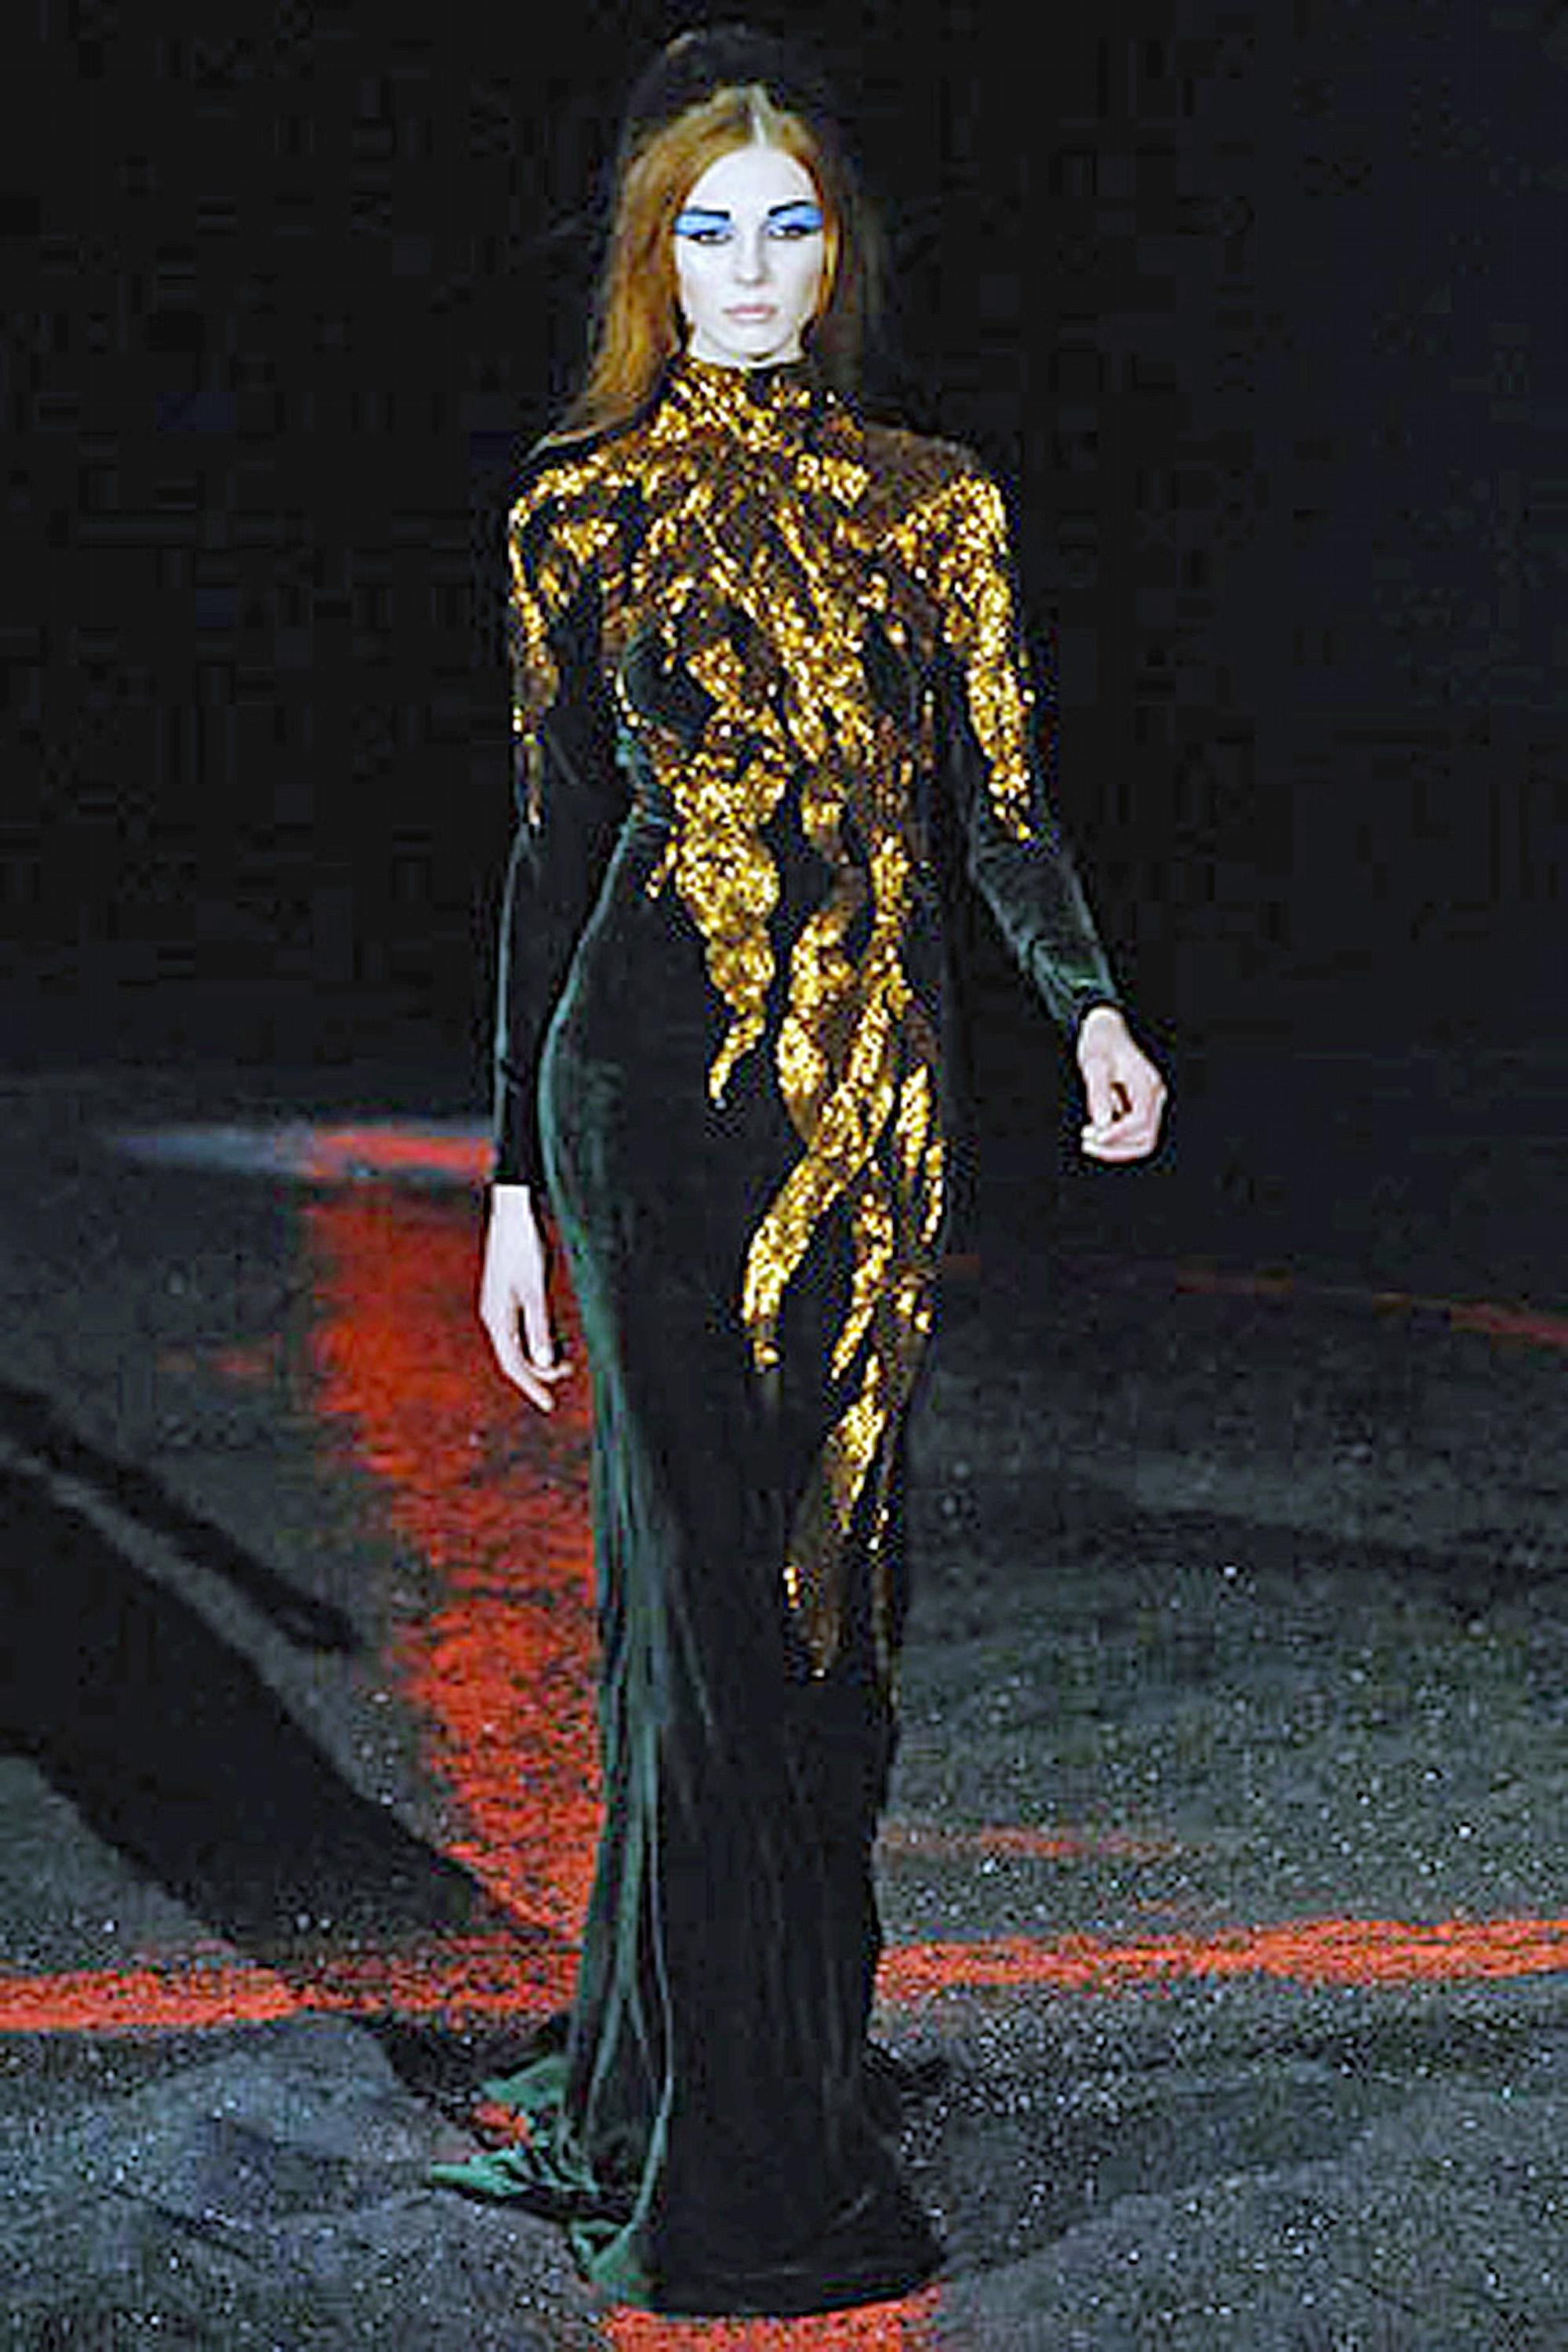 Highly coveted and now part of permanent museum collections is Alexander McQueen's 2007 sumptuous velvet flame gown.  This is the final one in my inventory offered brand new and unworn.

Fashioned of soft bias cut deep forest green panne silk velvet